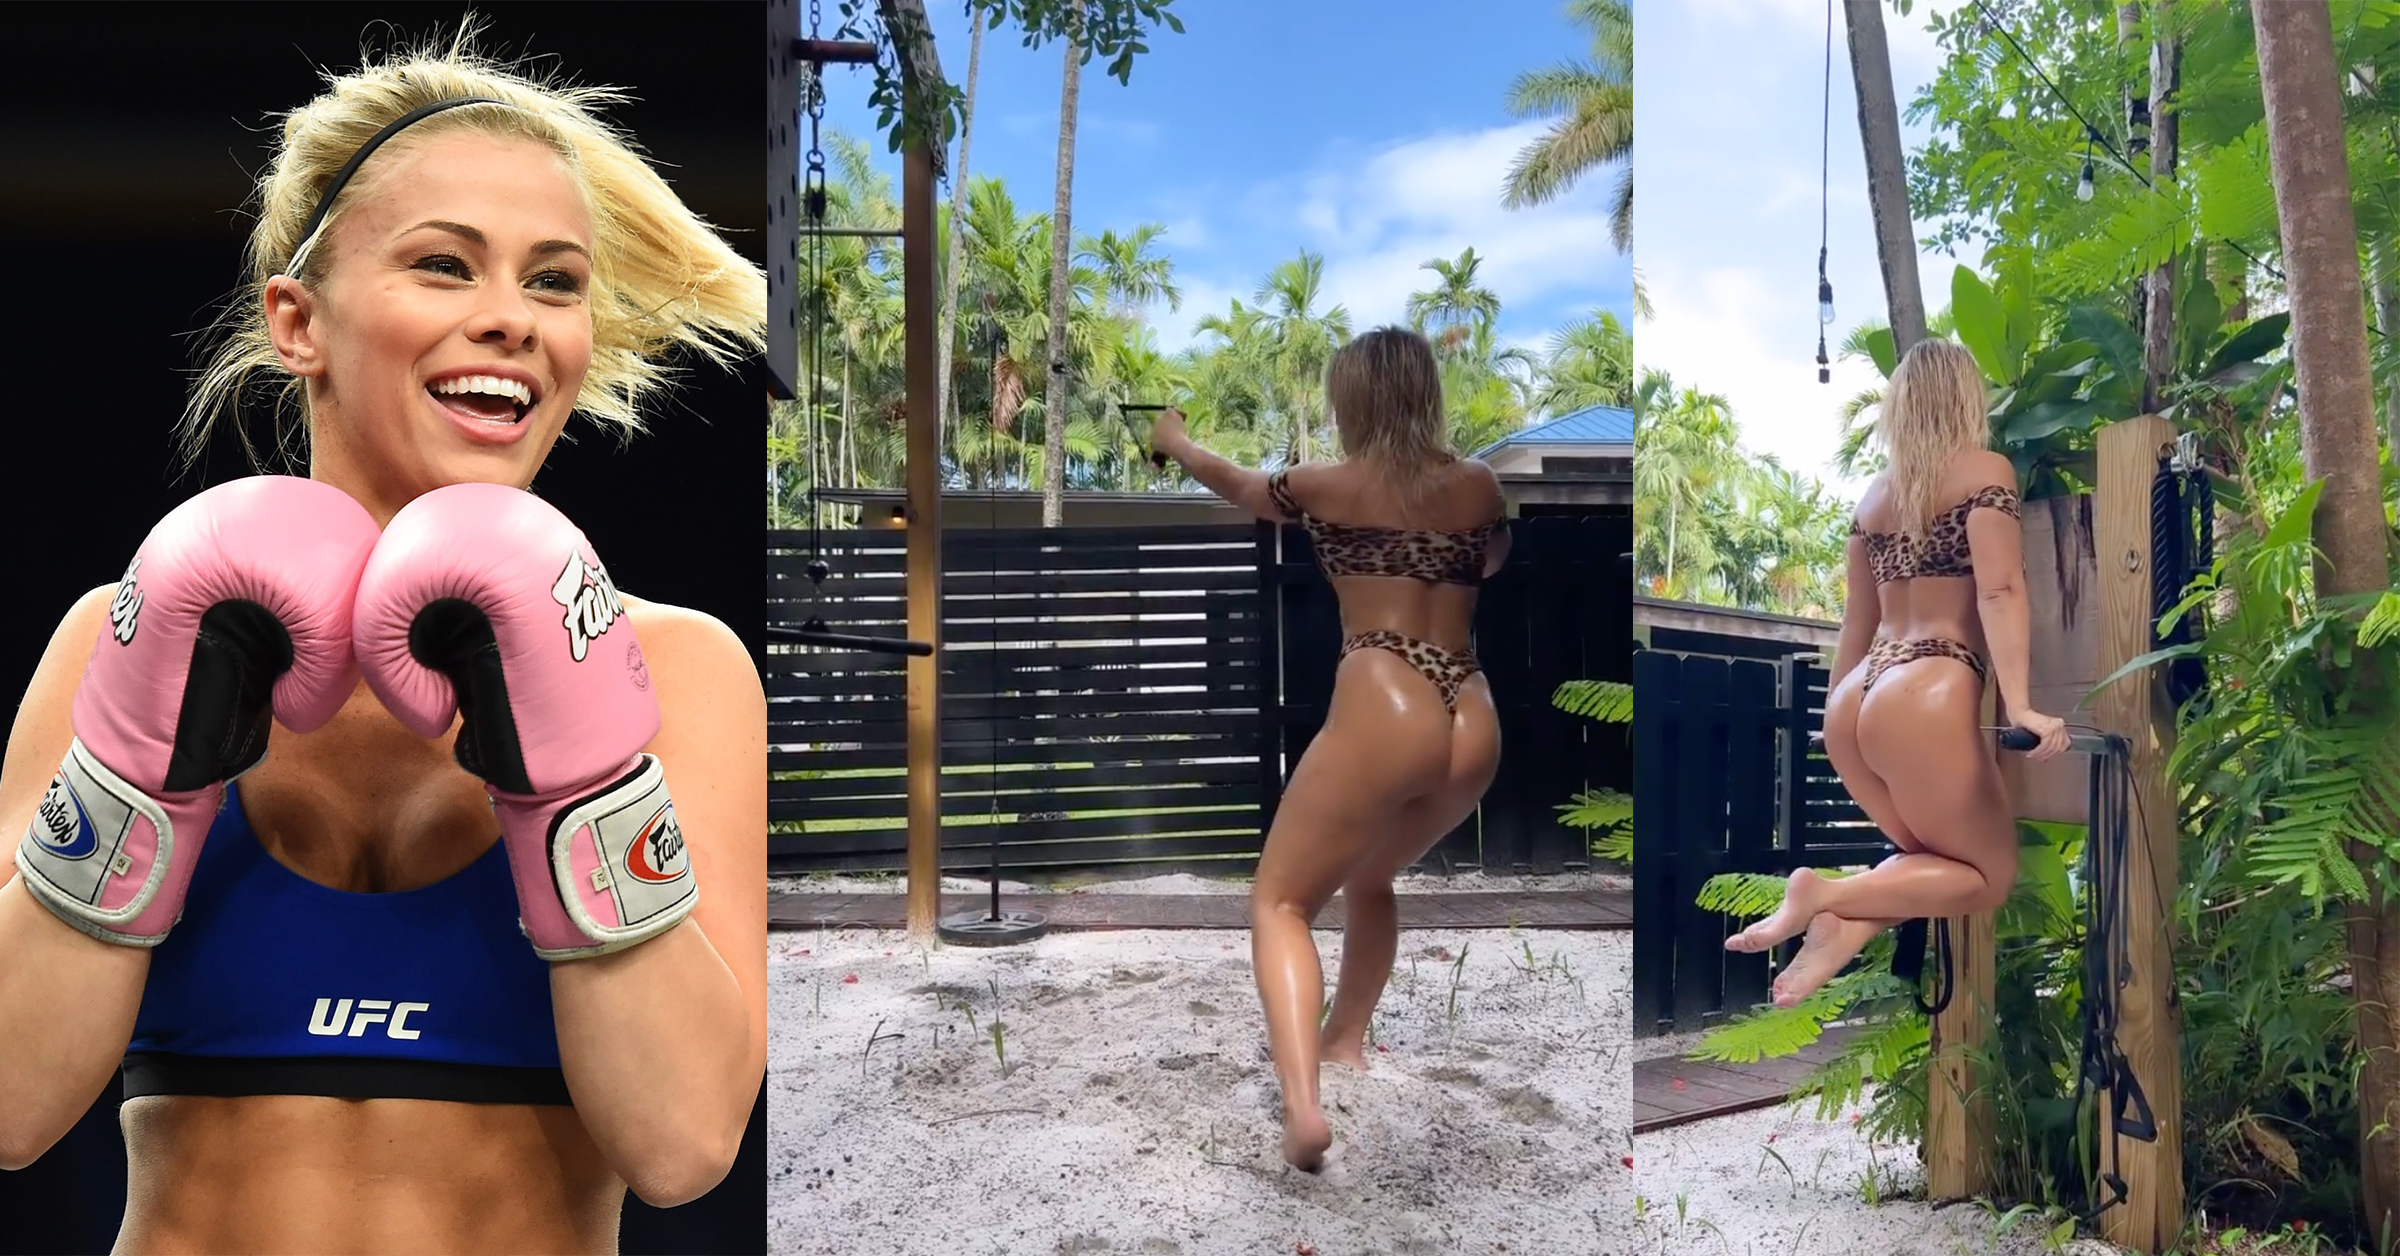 The 28 year former UFC Fighter Paige VanZant is still keeping herself in se...